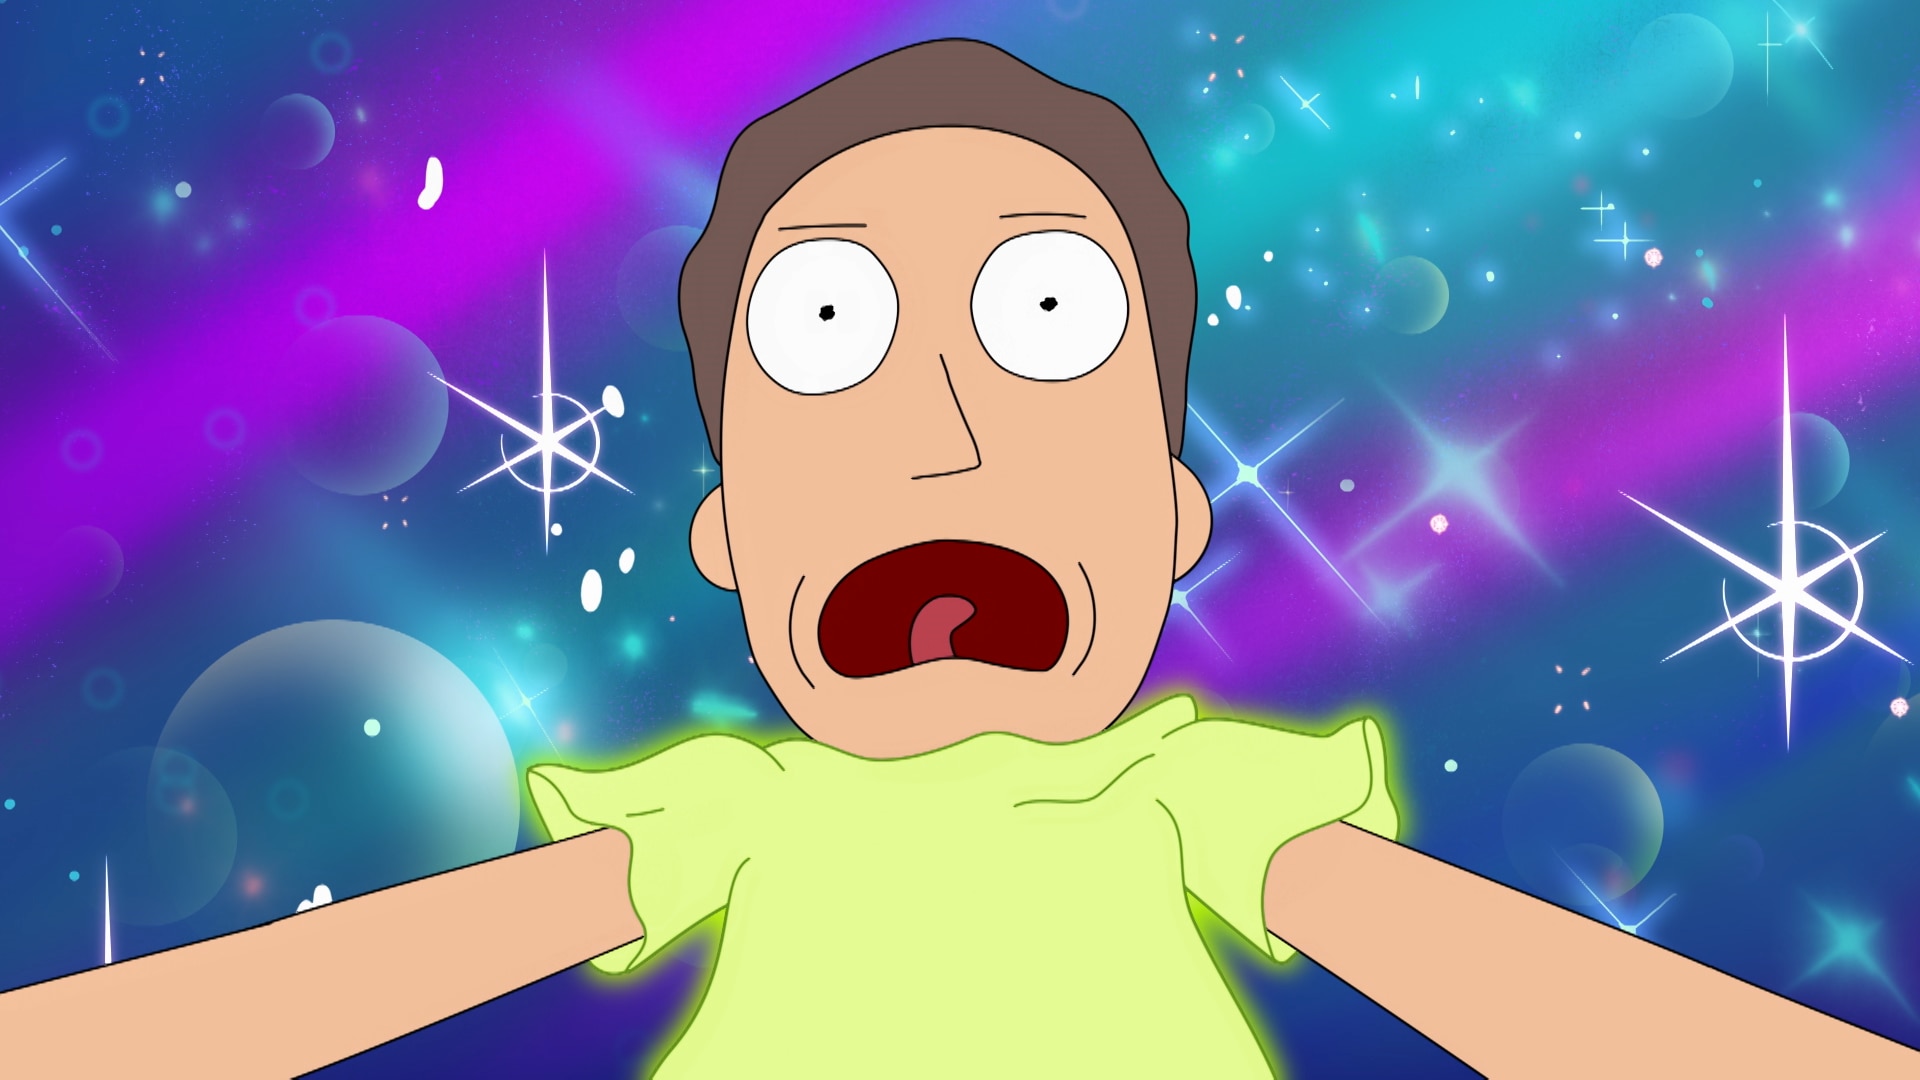 How to Watch Rick and Morty Season 6 Online: Adult Swim Live Stream